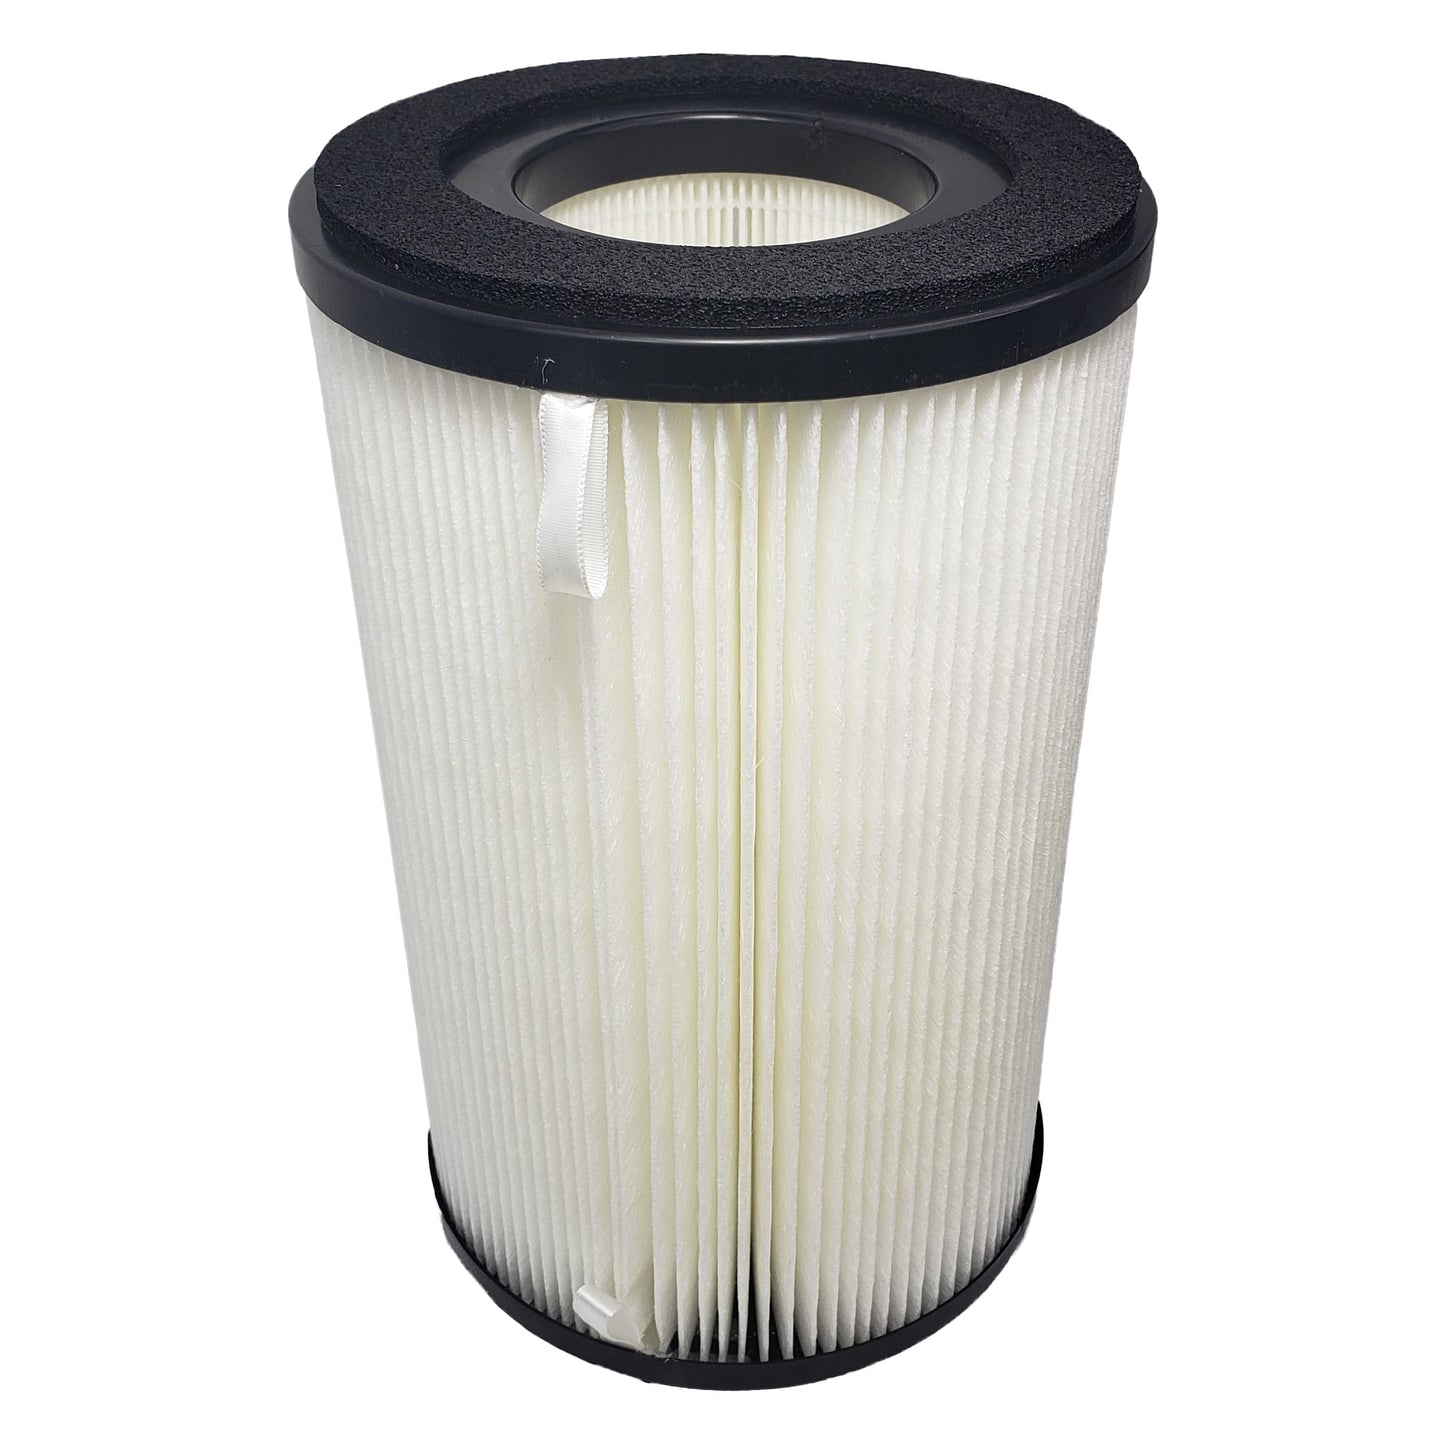 Replacement HEPA Filter - 4" HEPA Filter for Indo Air Intake Filter System